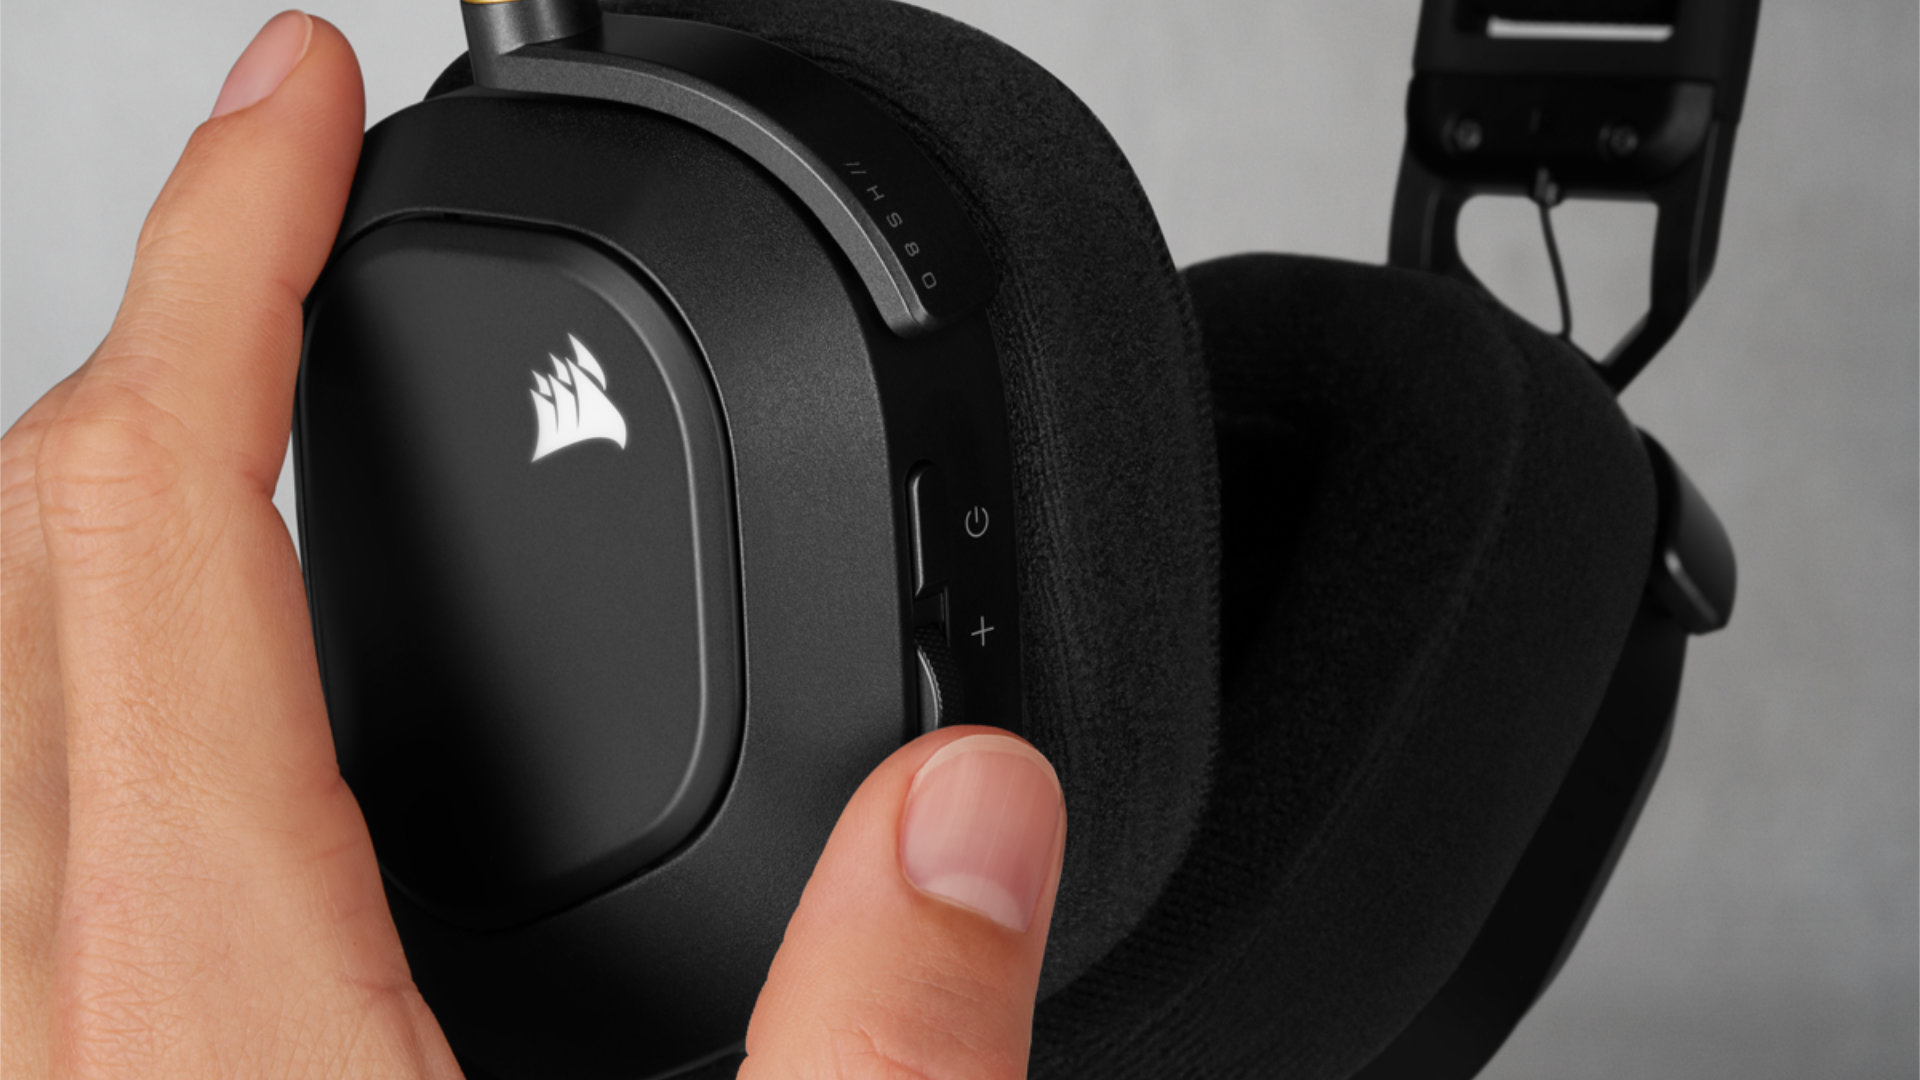 How the Corsair HS80 Headset Changed My Relationship With Gaming